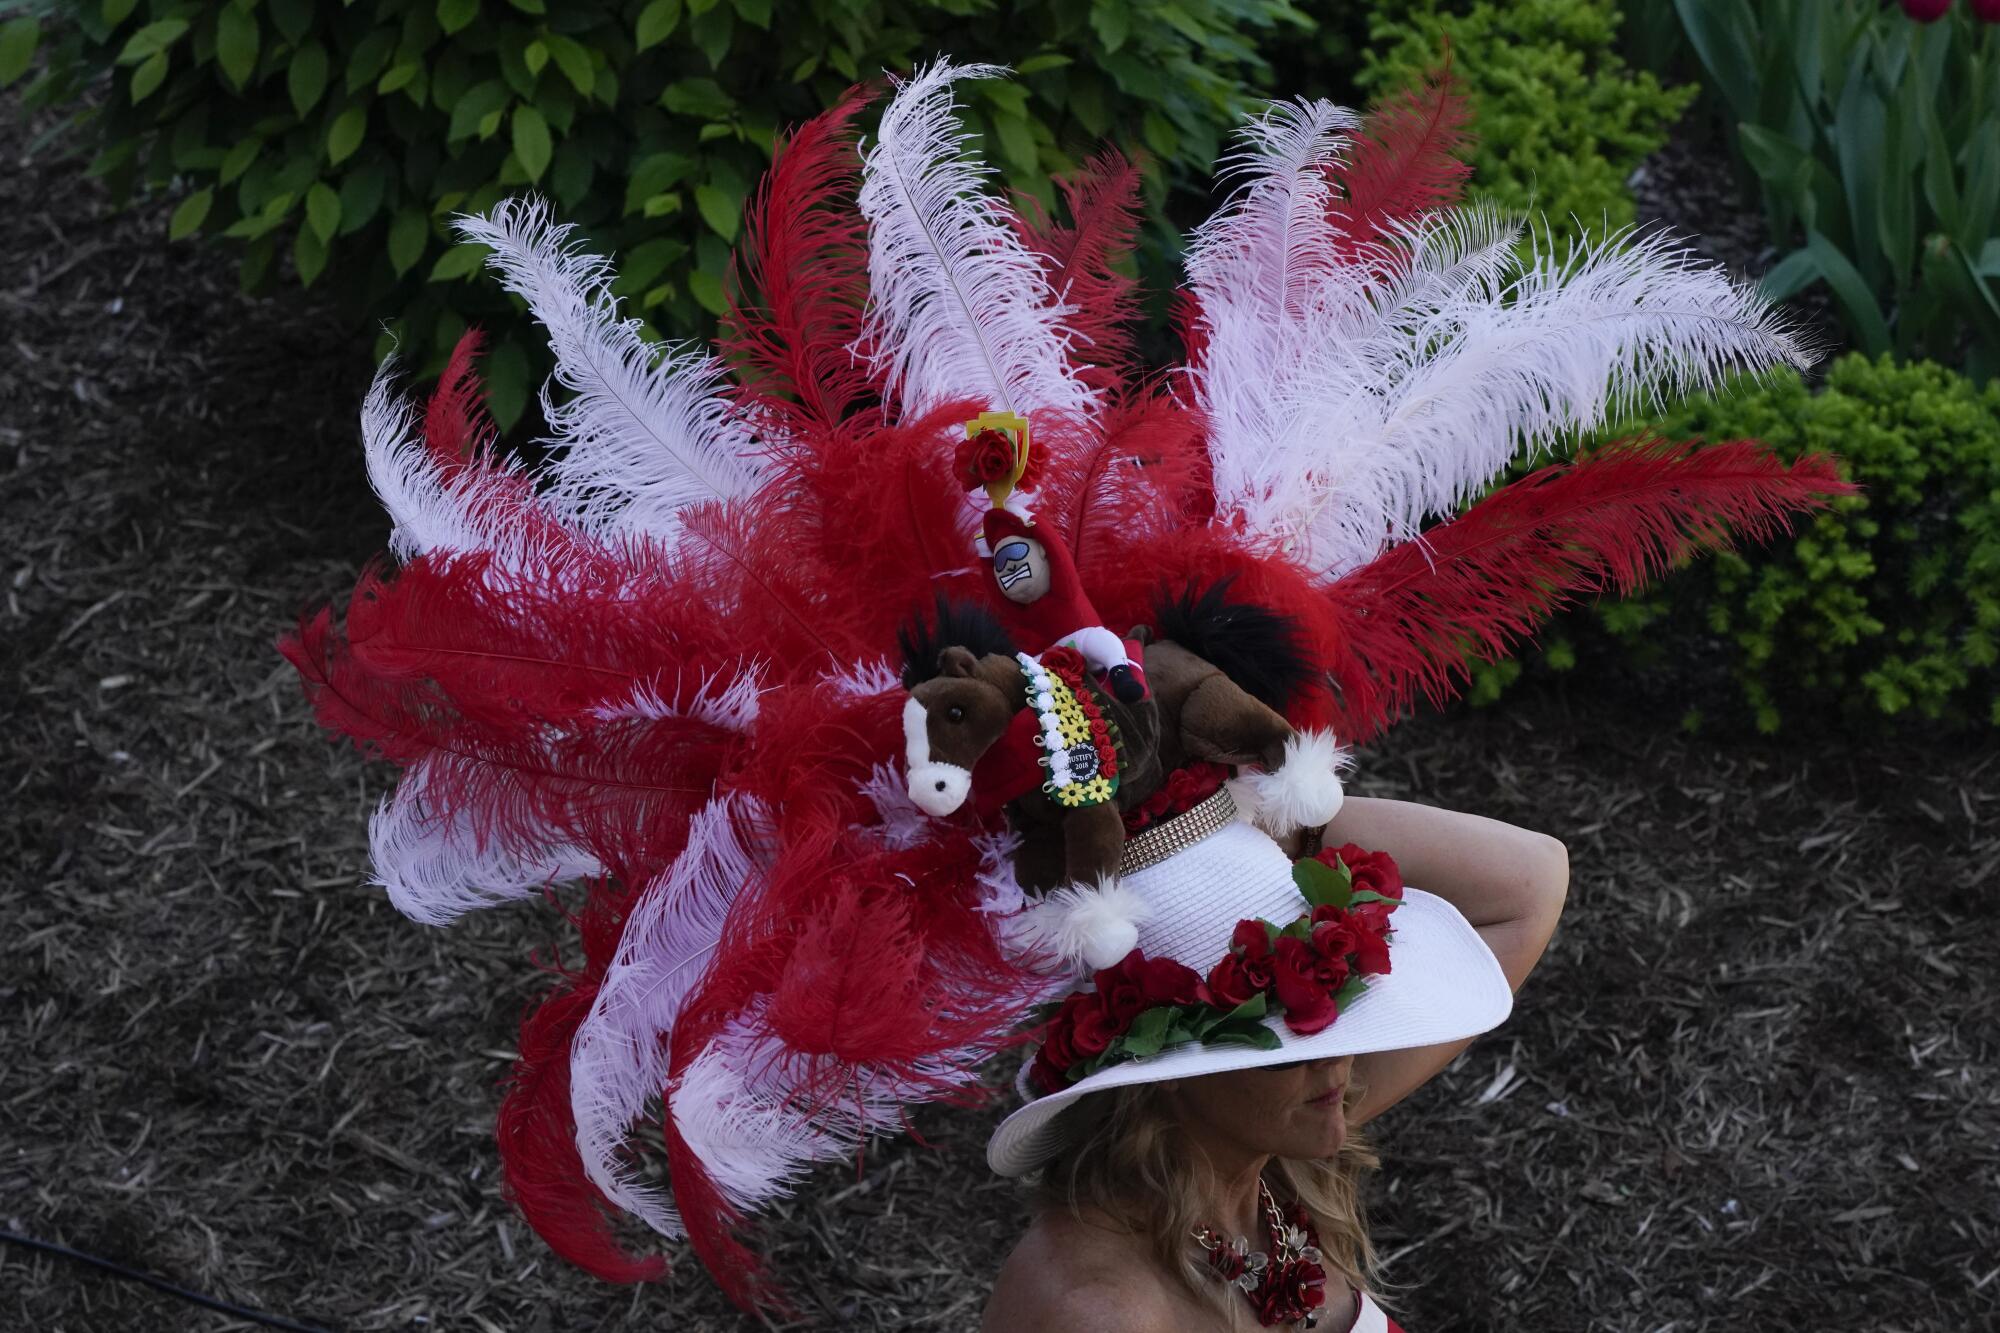 A women walks in a white brimmed hat with red roses around it and red and white feathers and a toy horse and rider above it.